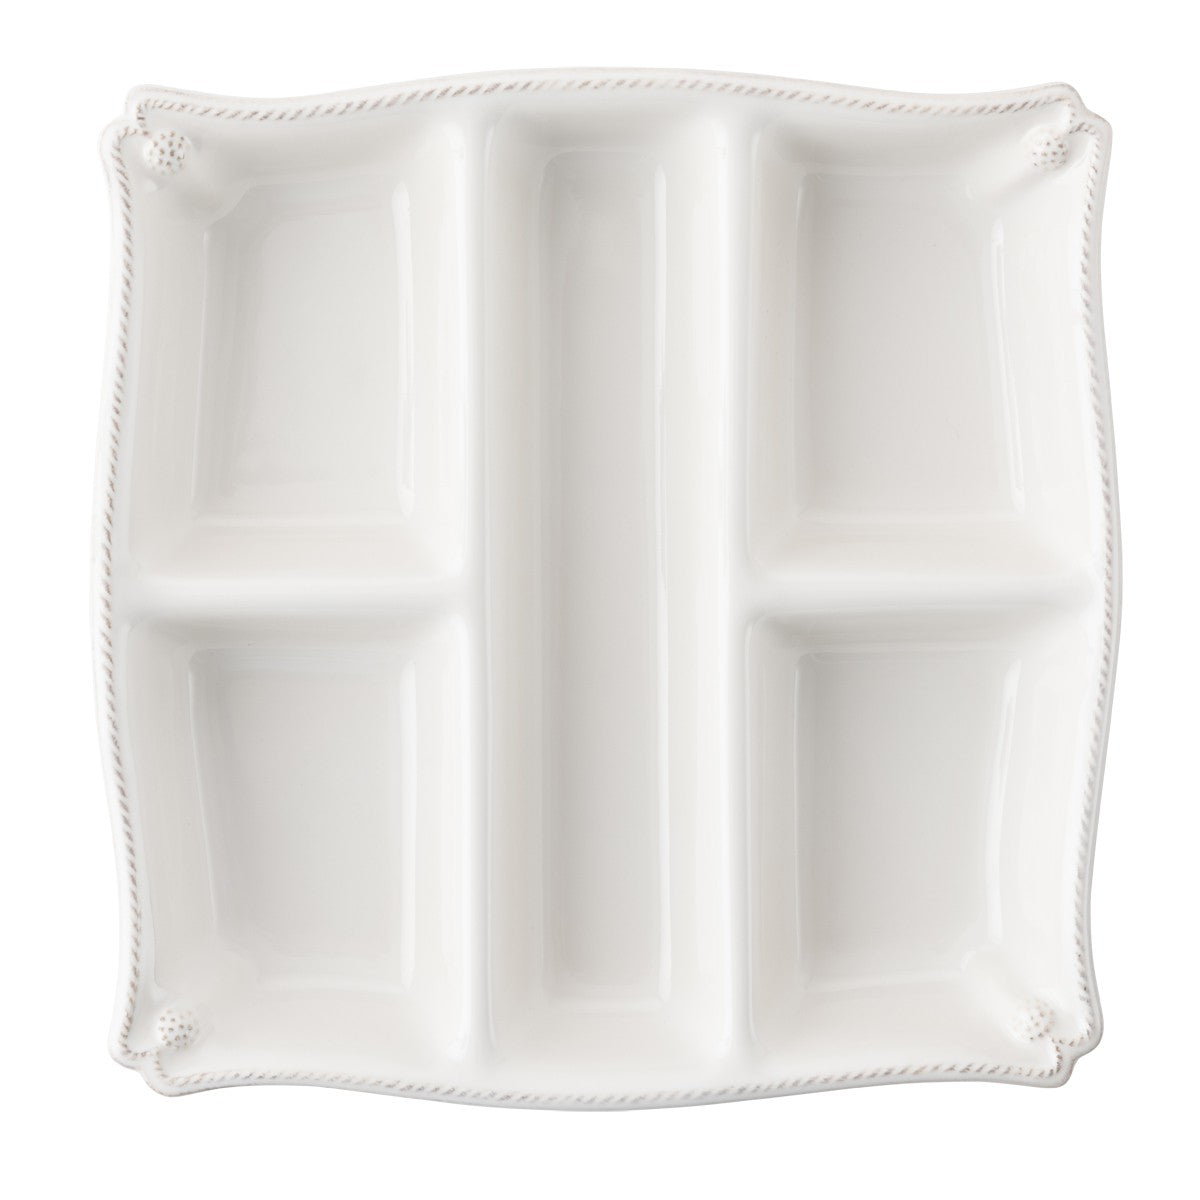 top view of the berry and thread appetizer plate on a white background